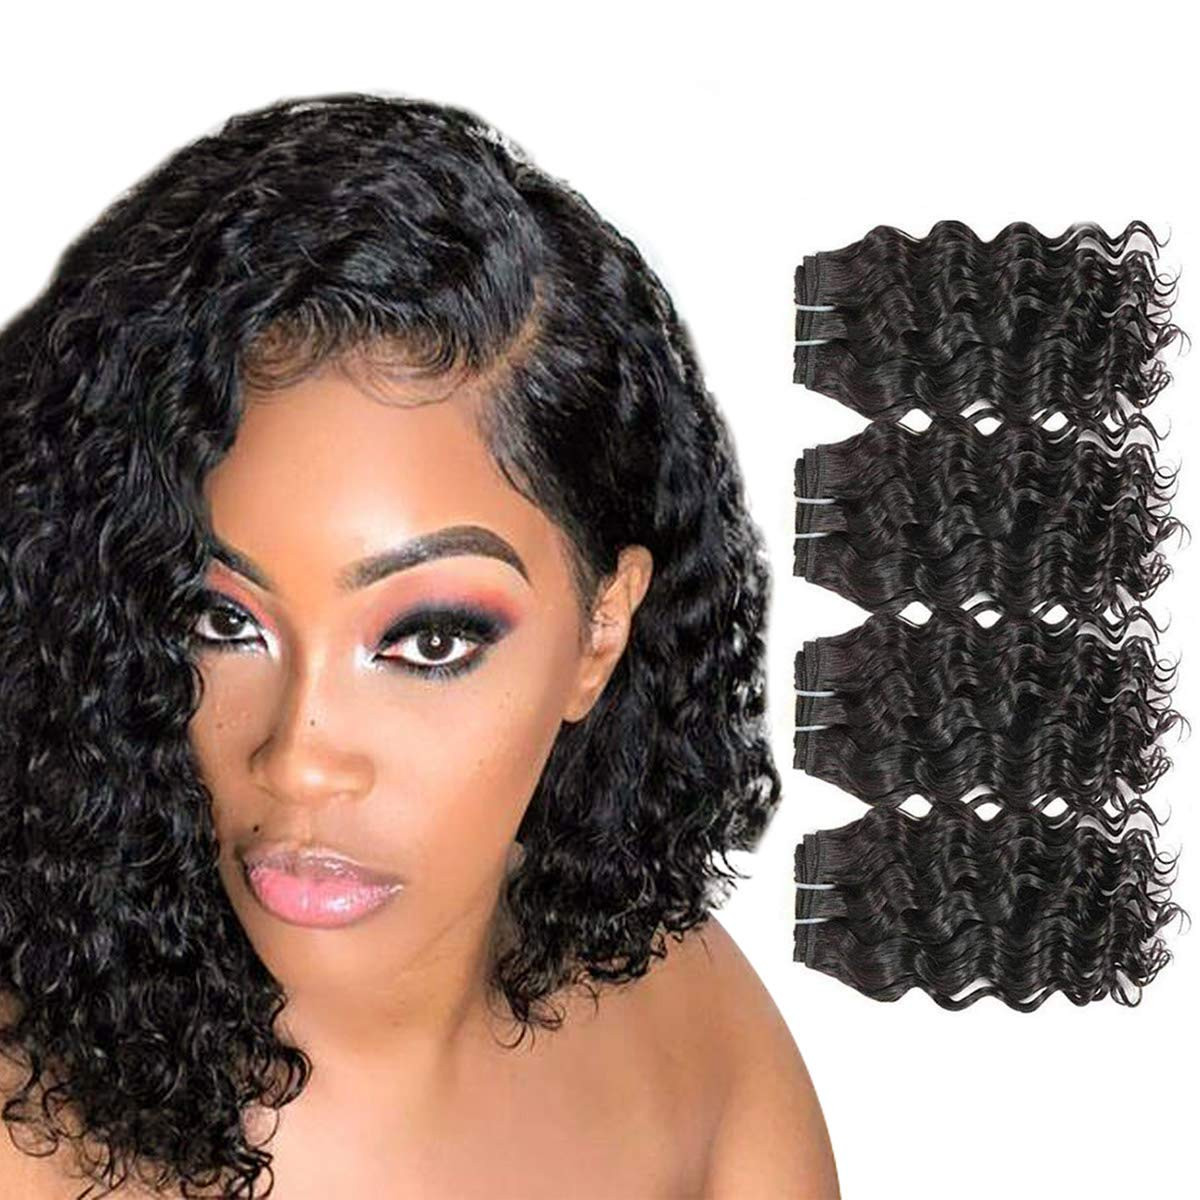 Deep Wave Short Hairstyles Pictures Pin On Layed Hair Sehat Bugar